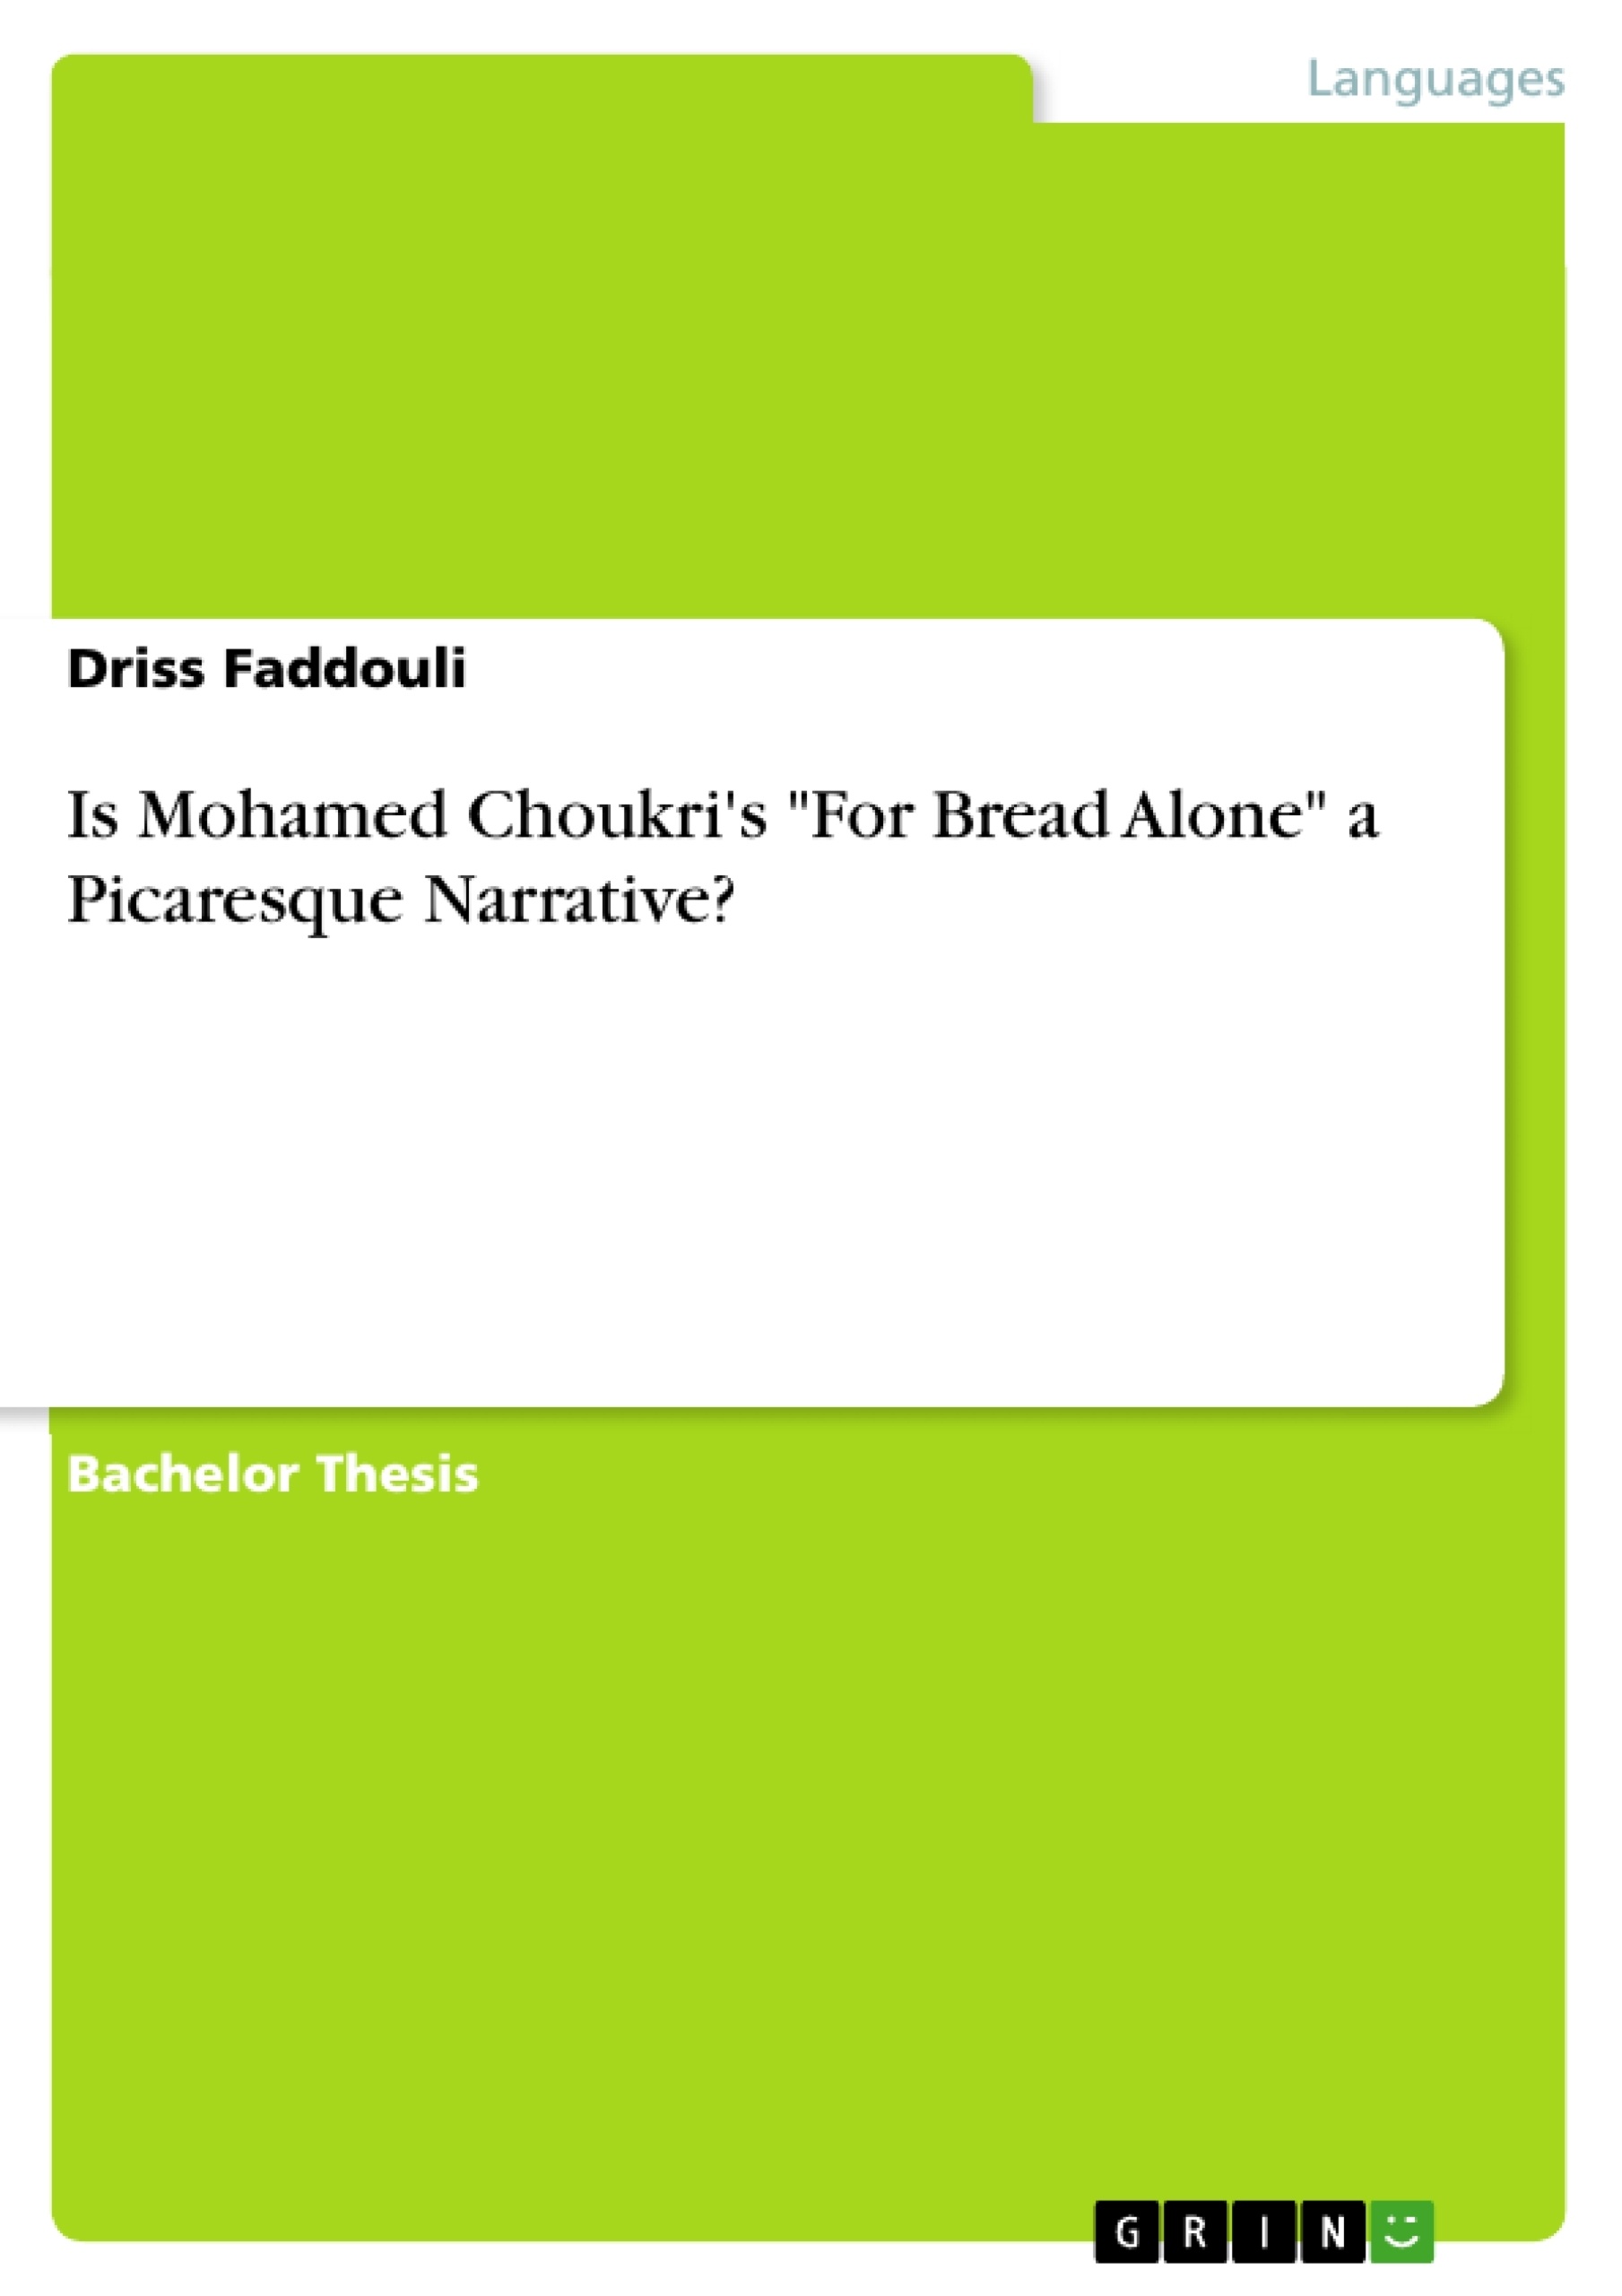 Title: Is Mohamed Choukri's "For Bread Alone" a Picaresque Narrative?